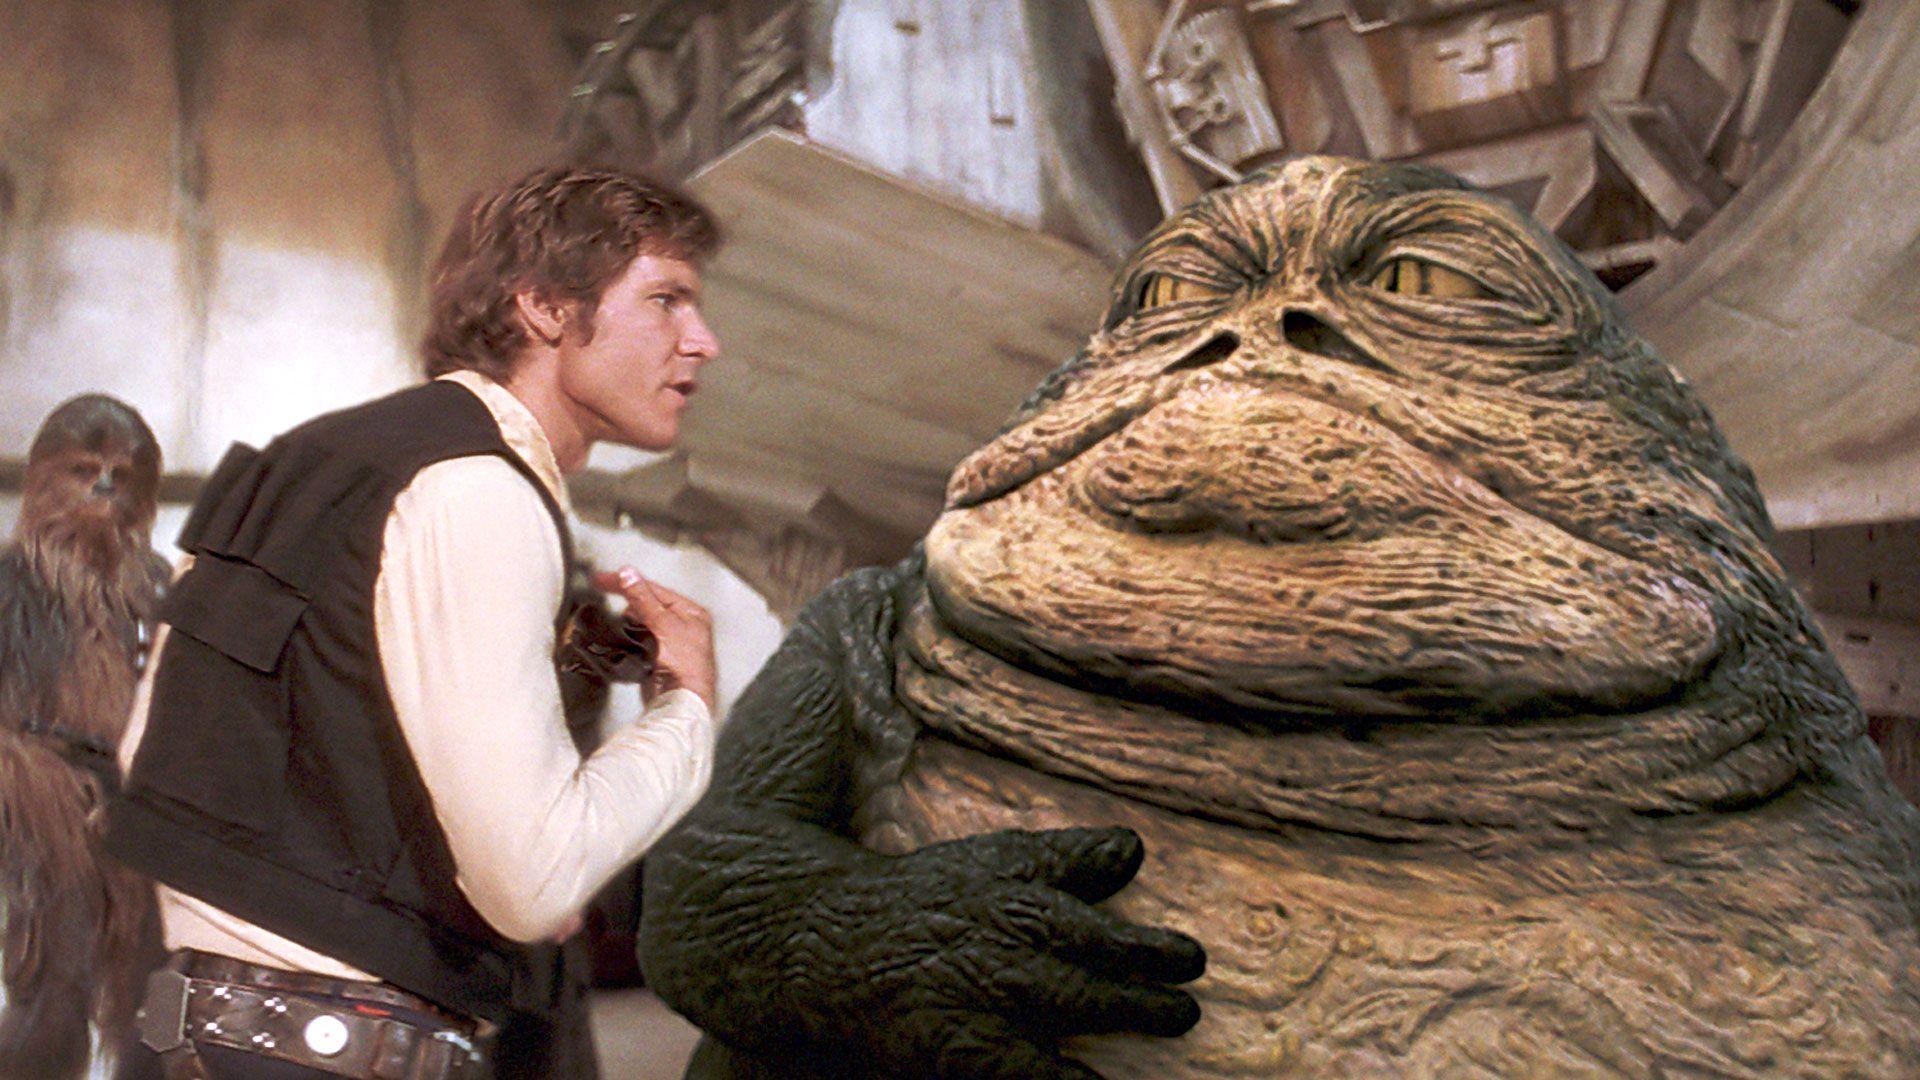 Jabba the Hutt will feature in the Han Solo movie story and he'll